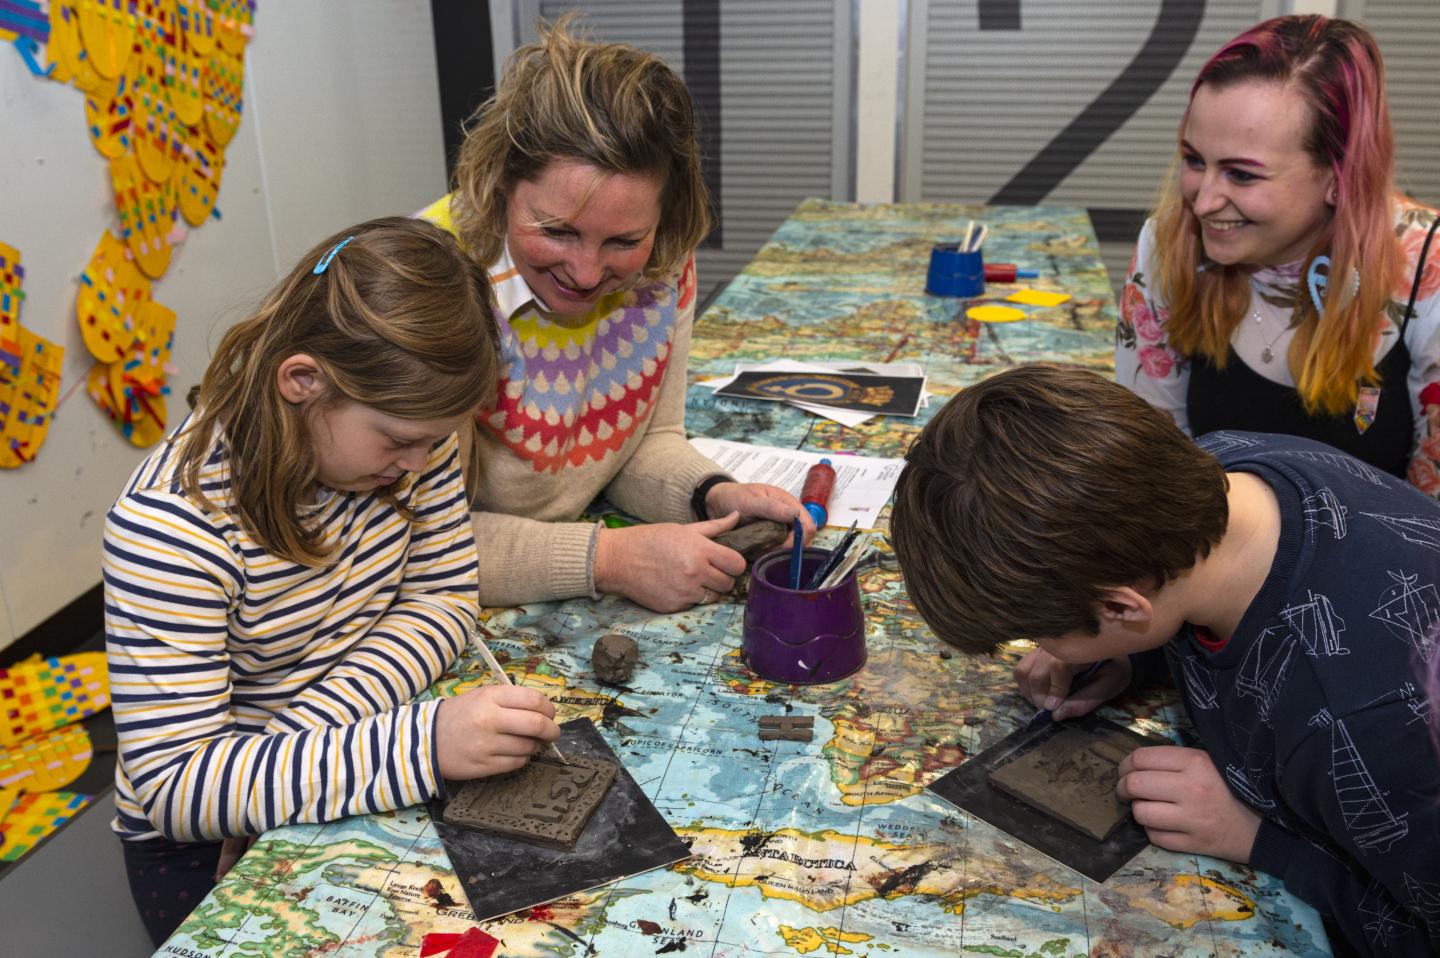 Family participating in a craft activity.